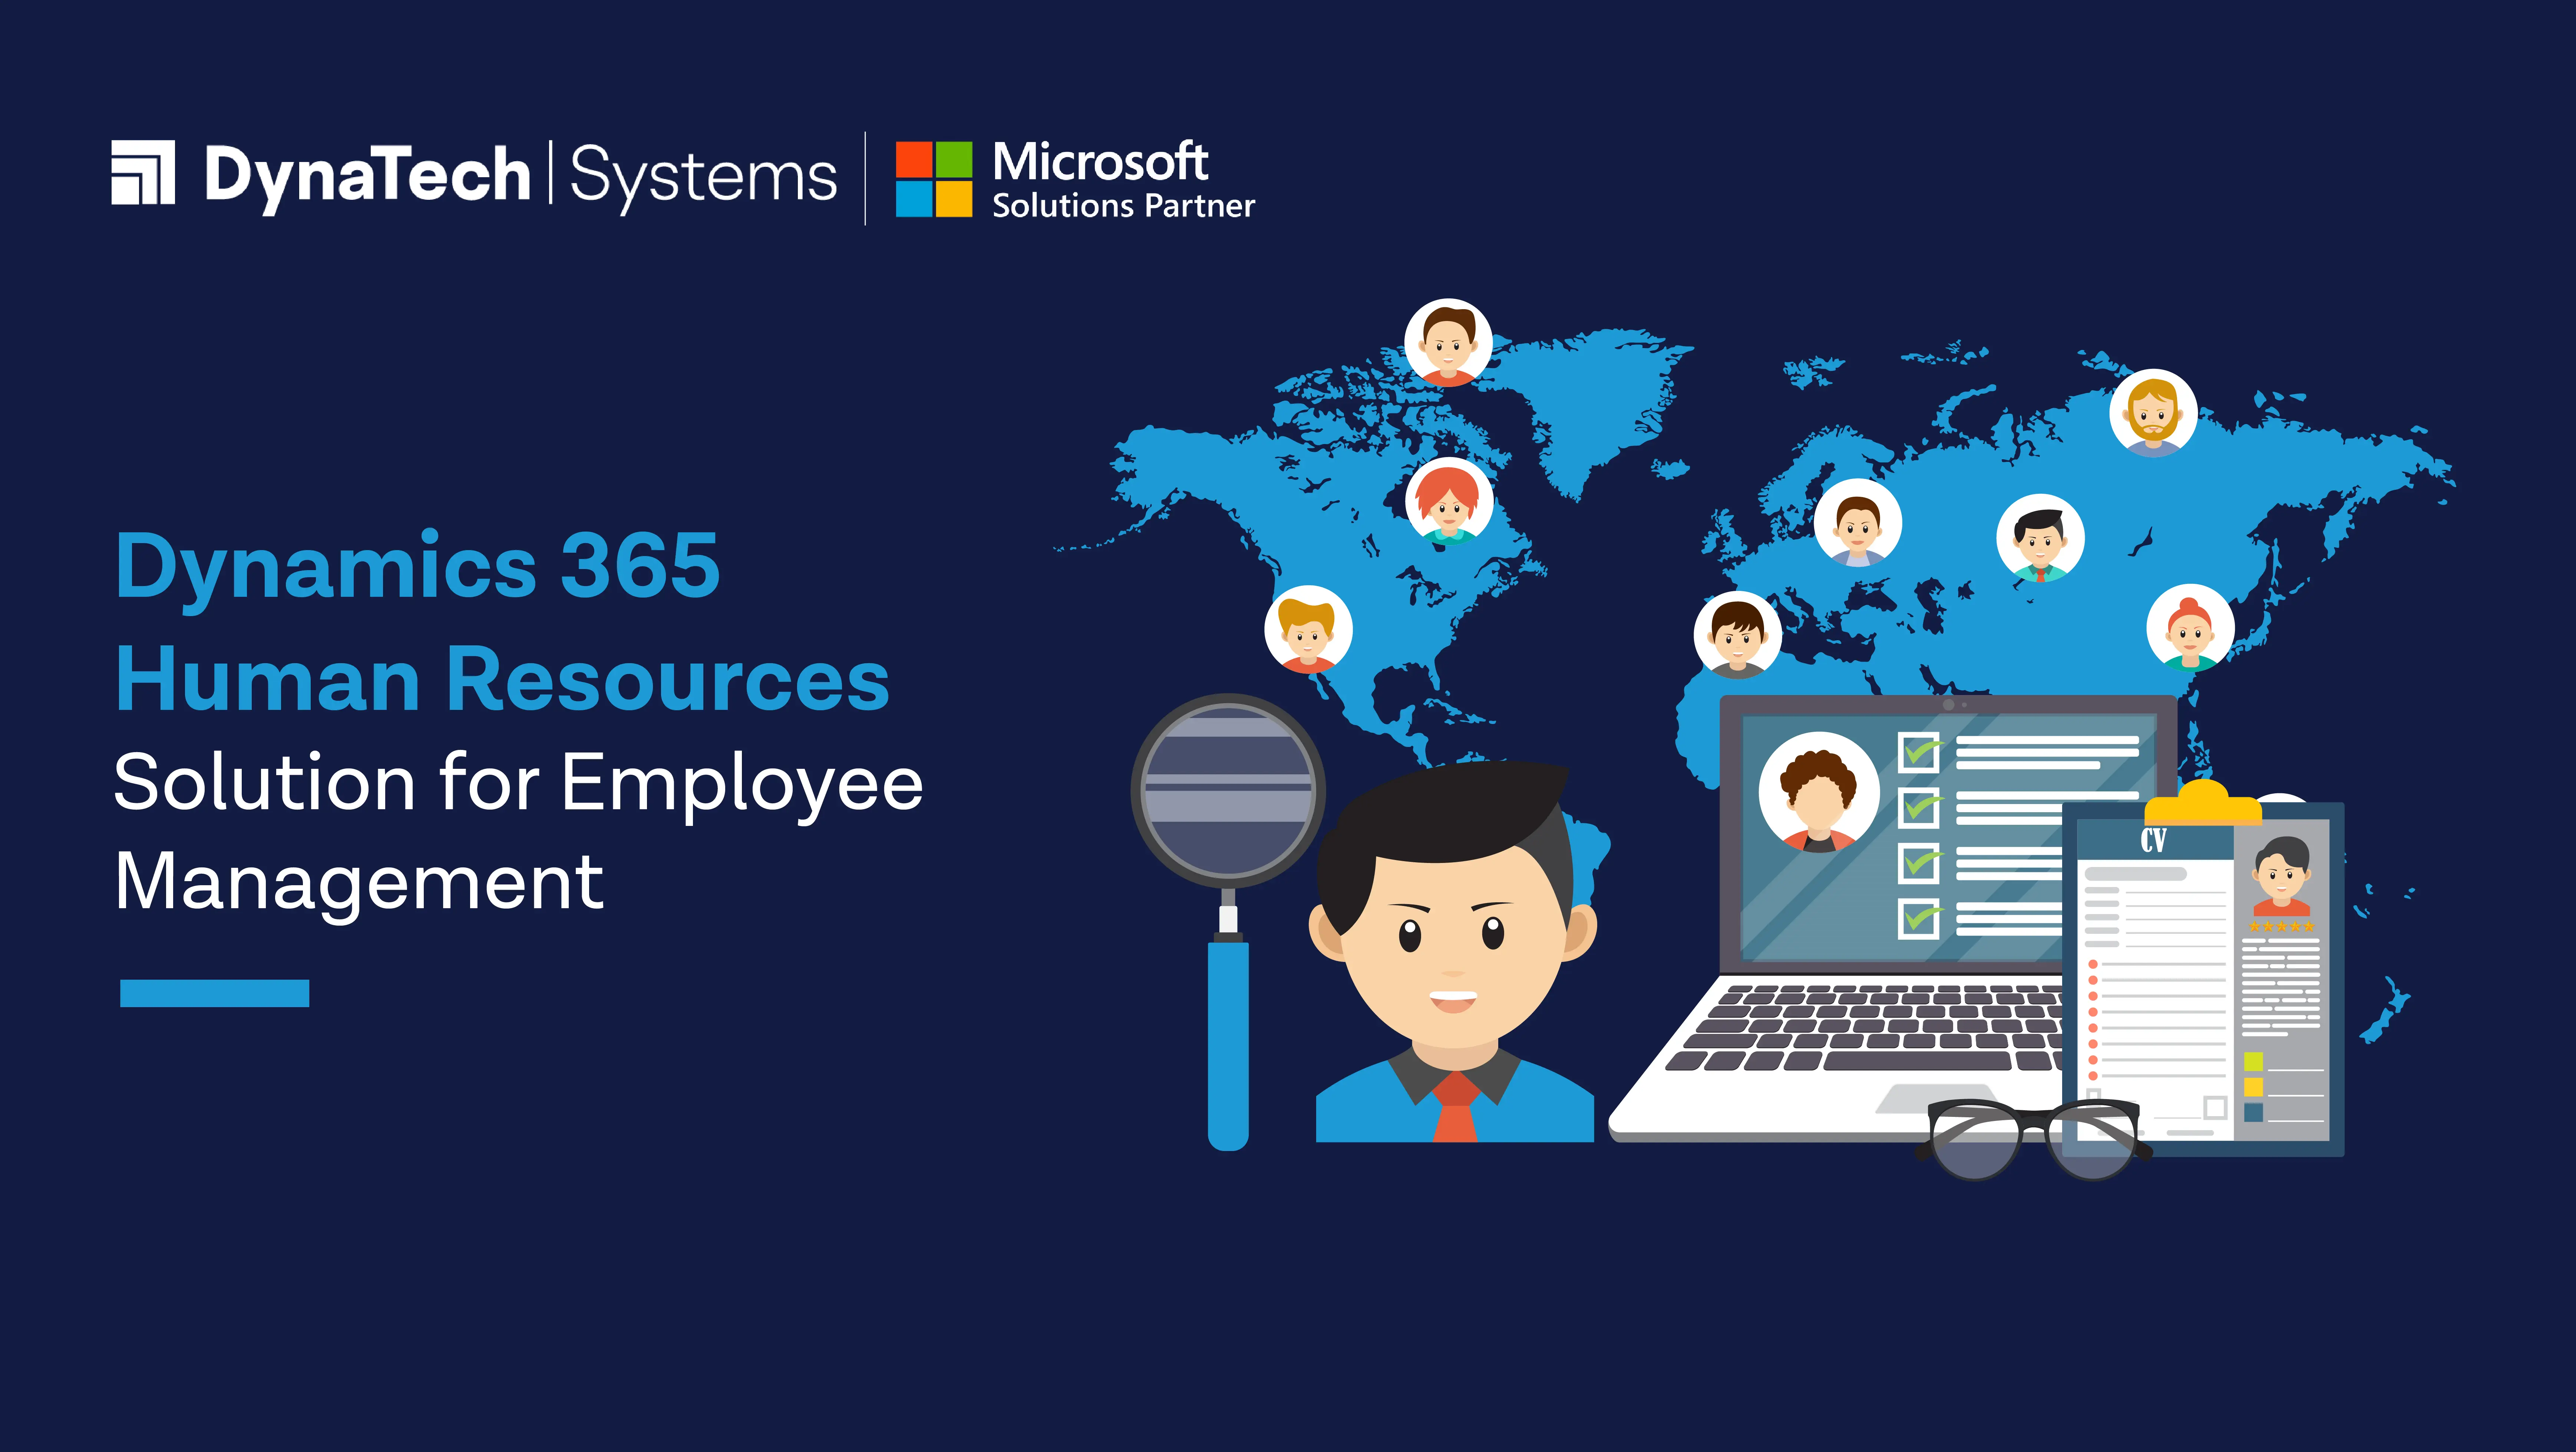 Dynamics 365 Human Resources Solution for Employee Management